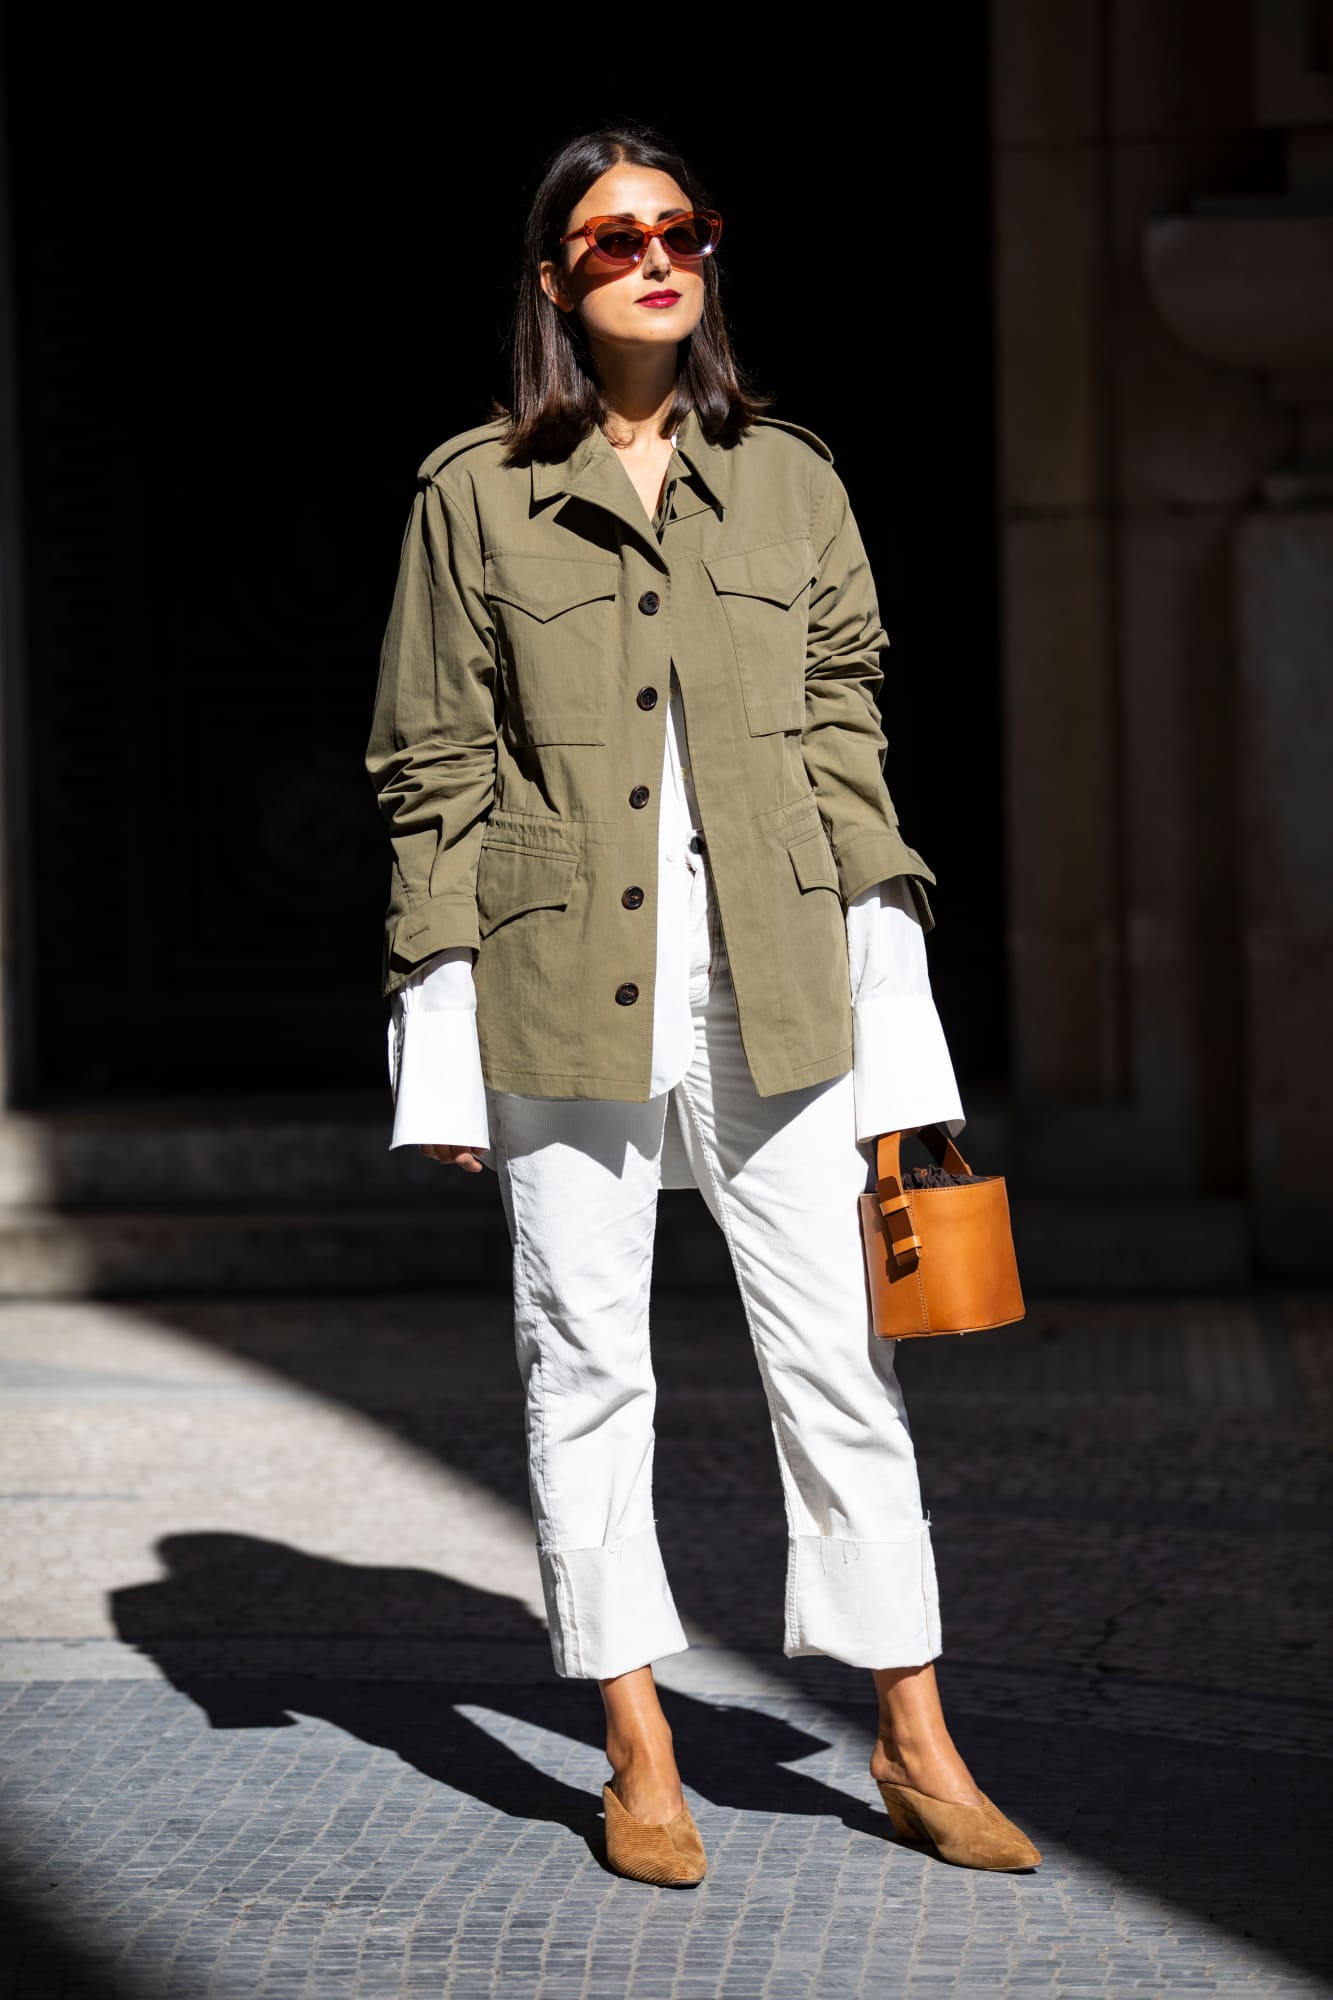 Spring outfit idea and wardrobe staples — green utility jacket, oval sunglasses, white jeans, mule heels